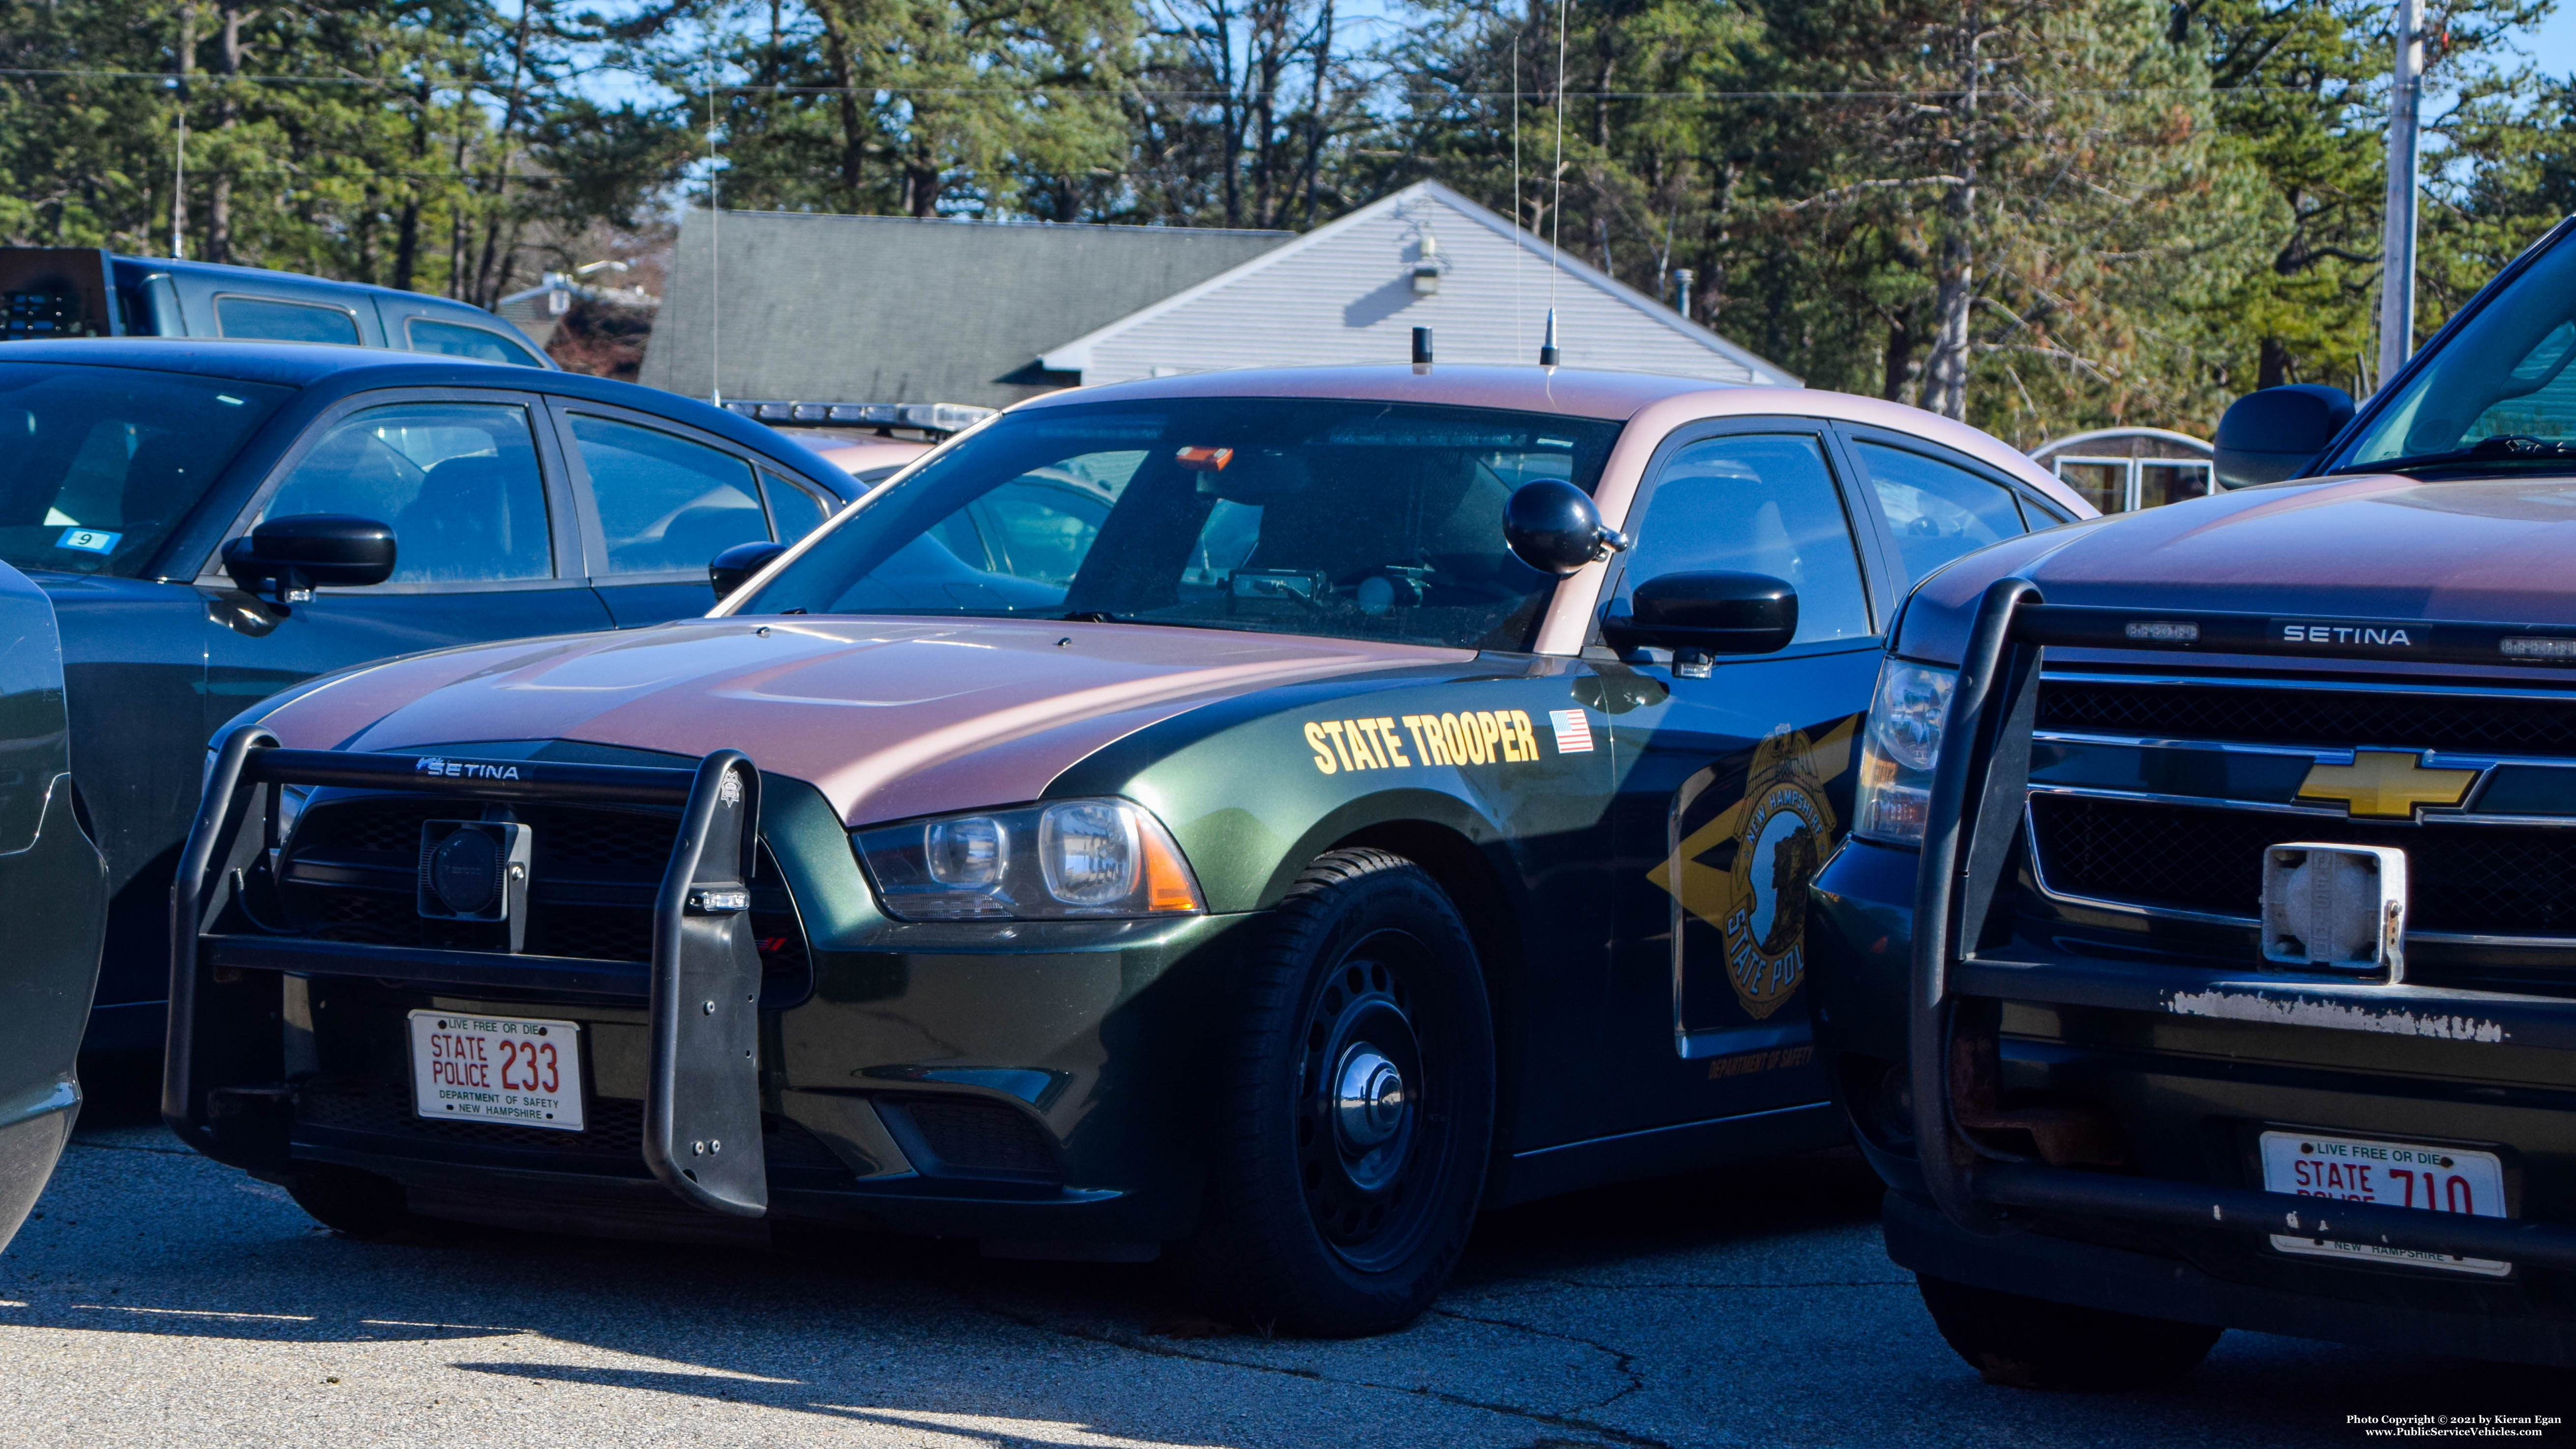 A photo  of New Hampshire State Police
            Cruiser 233, a 2014 Dodge Charger             taken by Kieran Egan